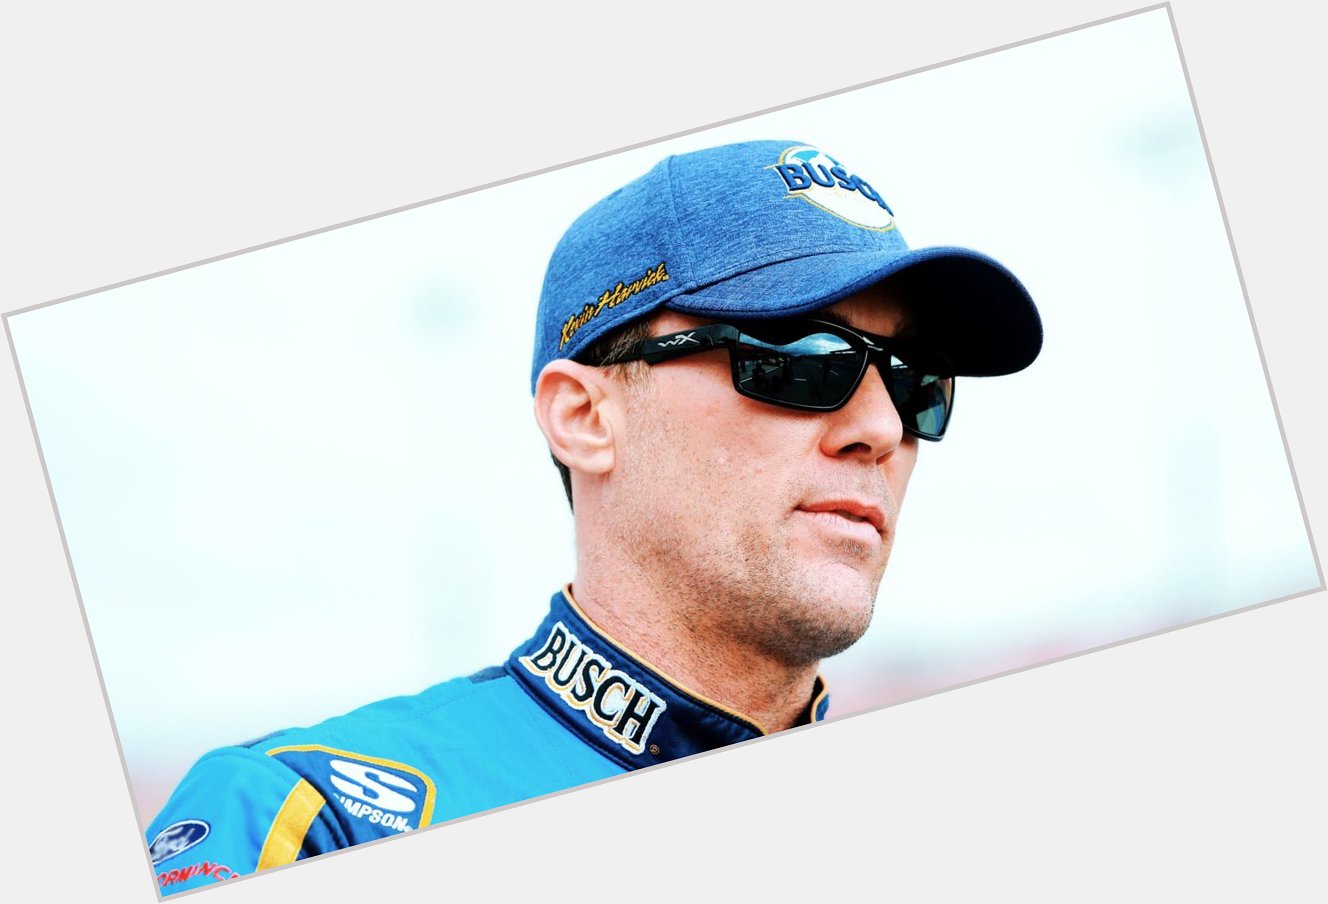 Happy birthday to our California Boy, Kevin Harvick, and Ryan Newman 